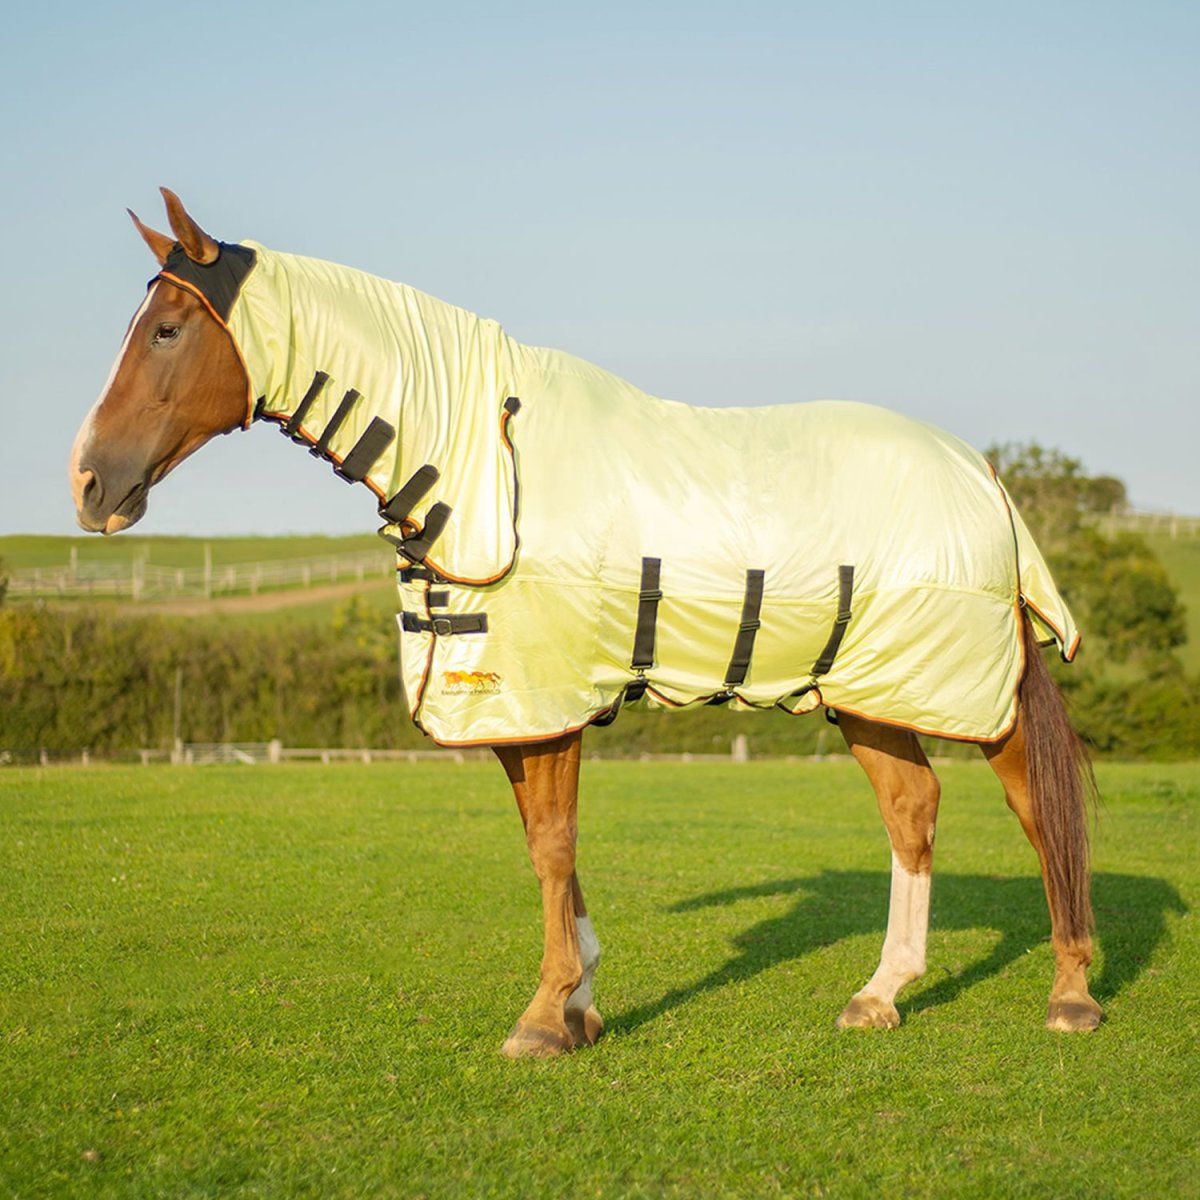 When should I put a fly rug on my horse?